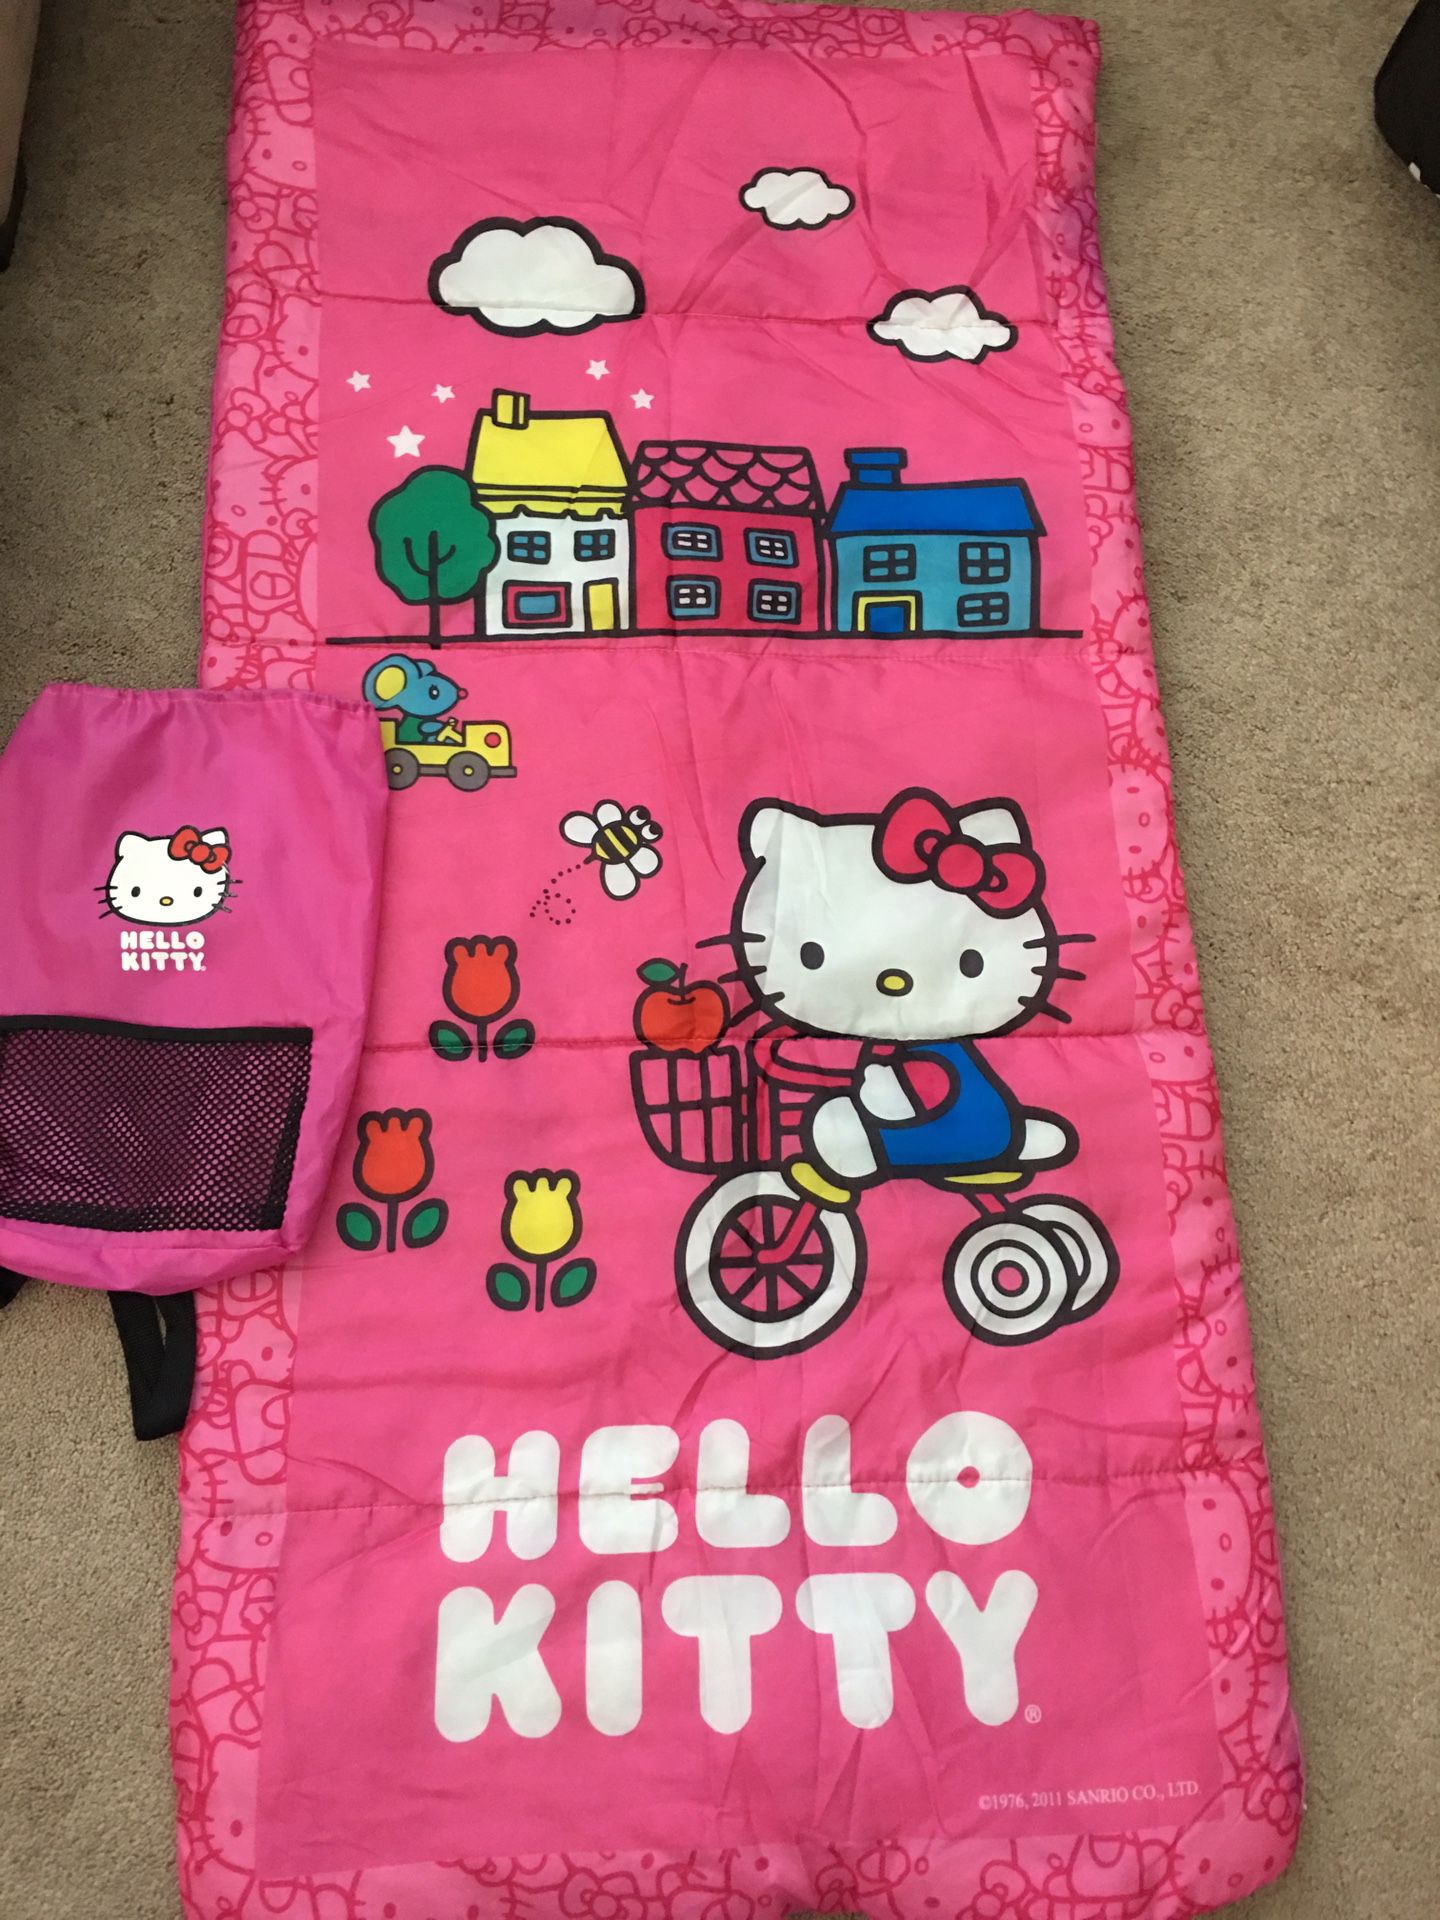 Authentic Hello kitty camping set